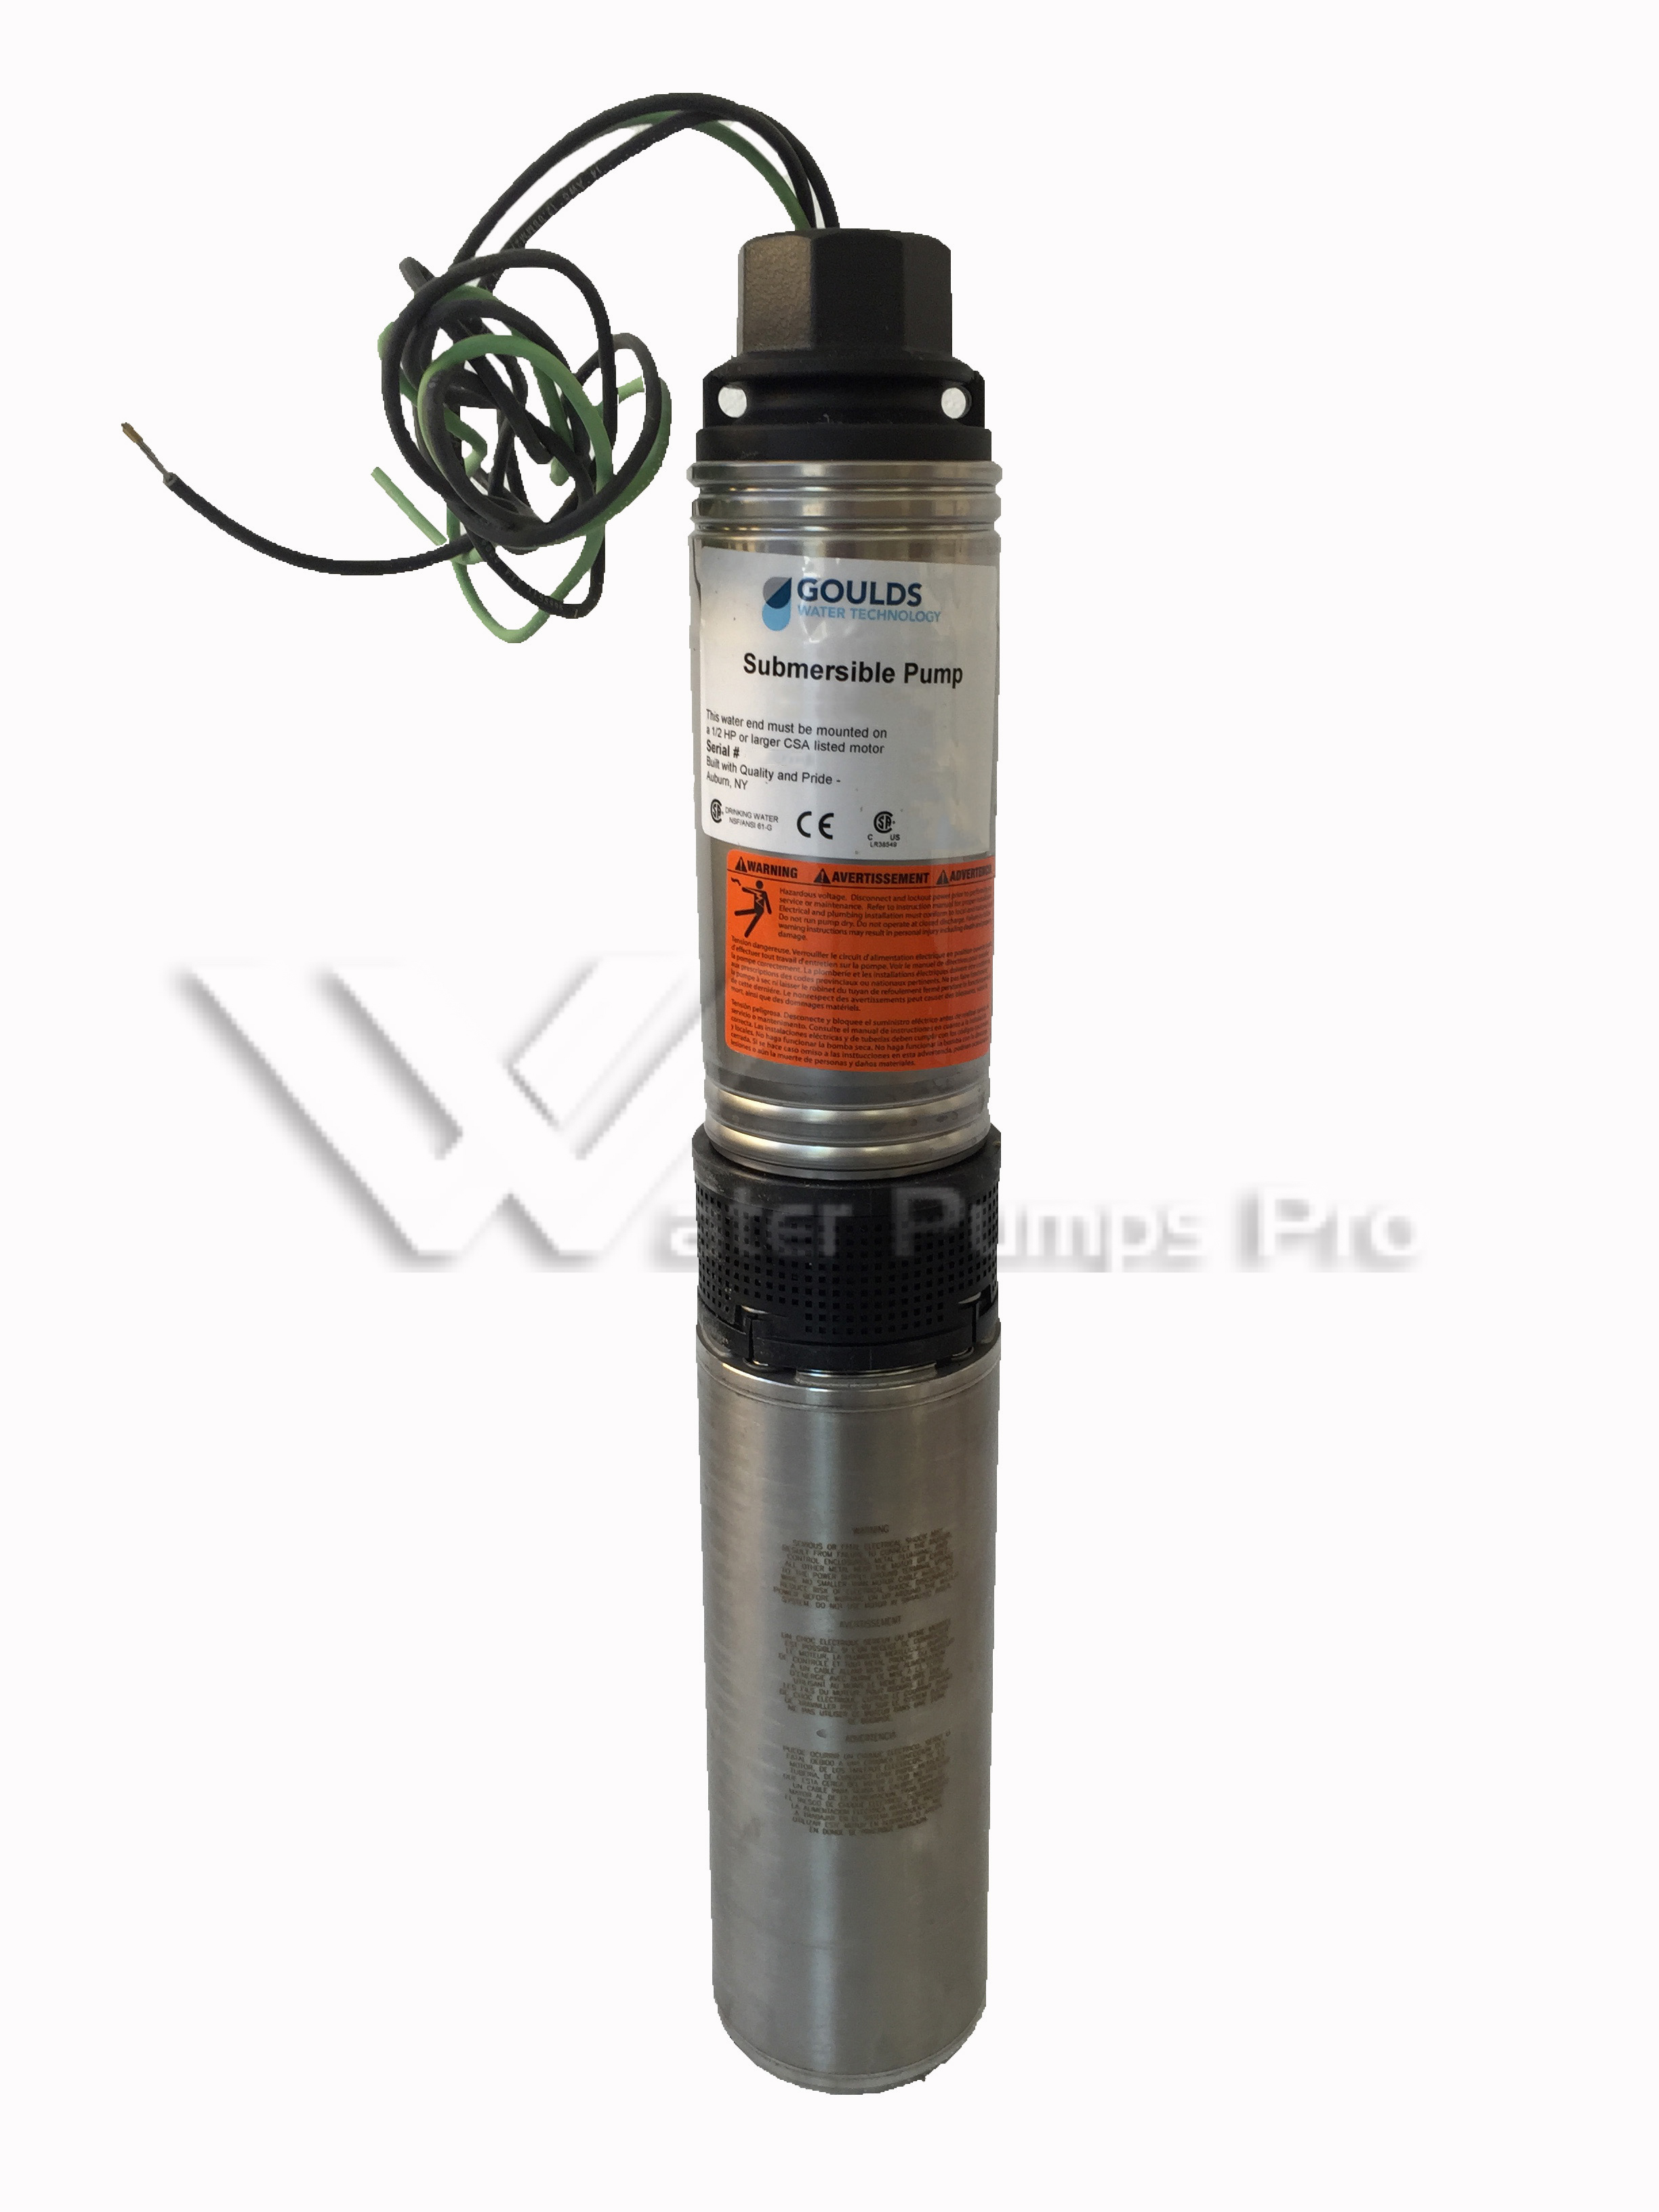 Goulds 5HS10422C Submersible Water Well Pump 1HP 230V 2Wire